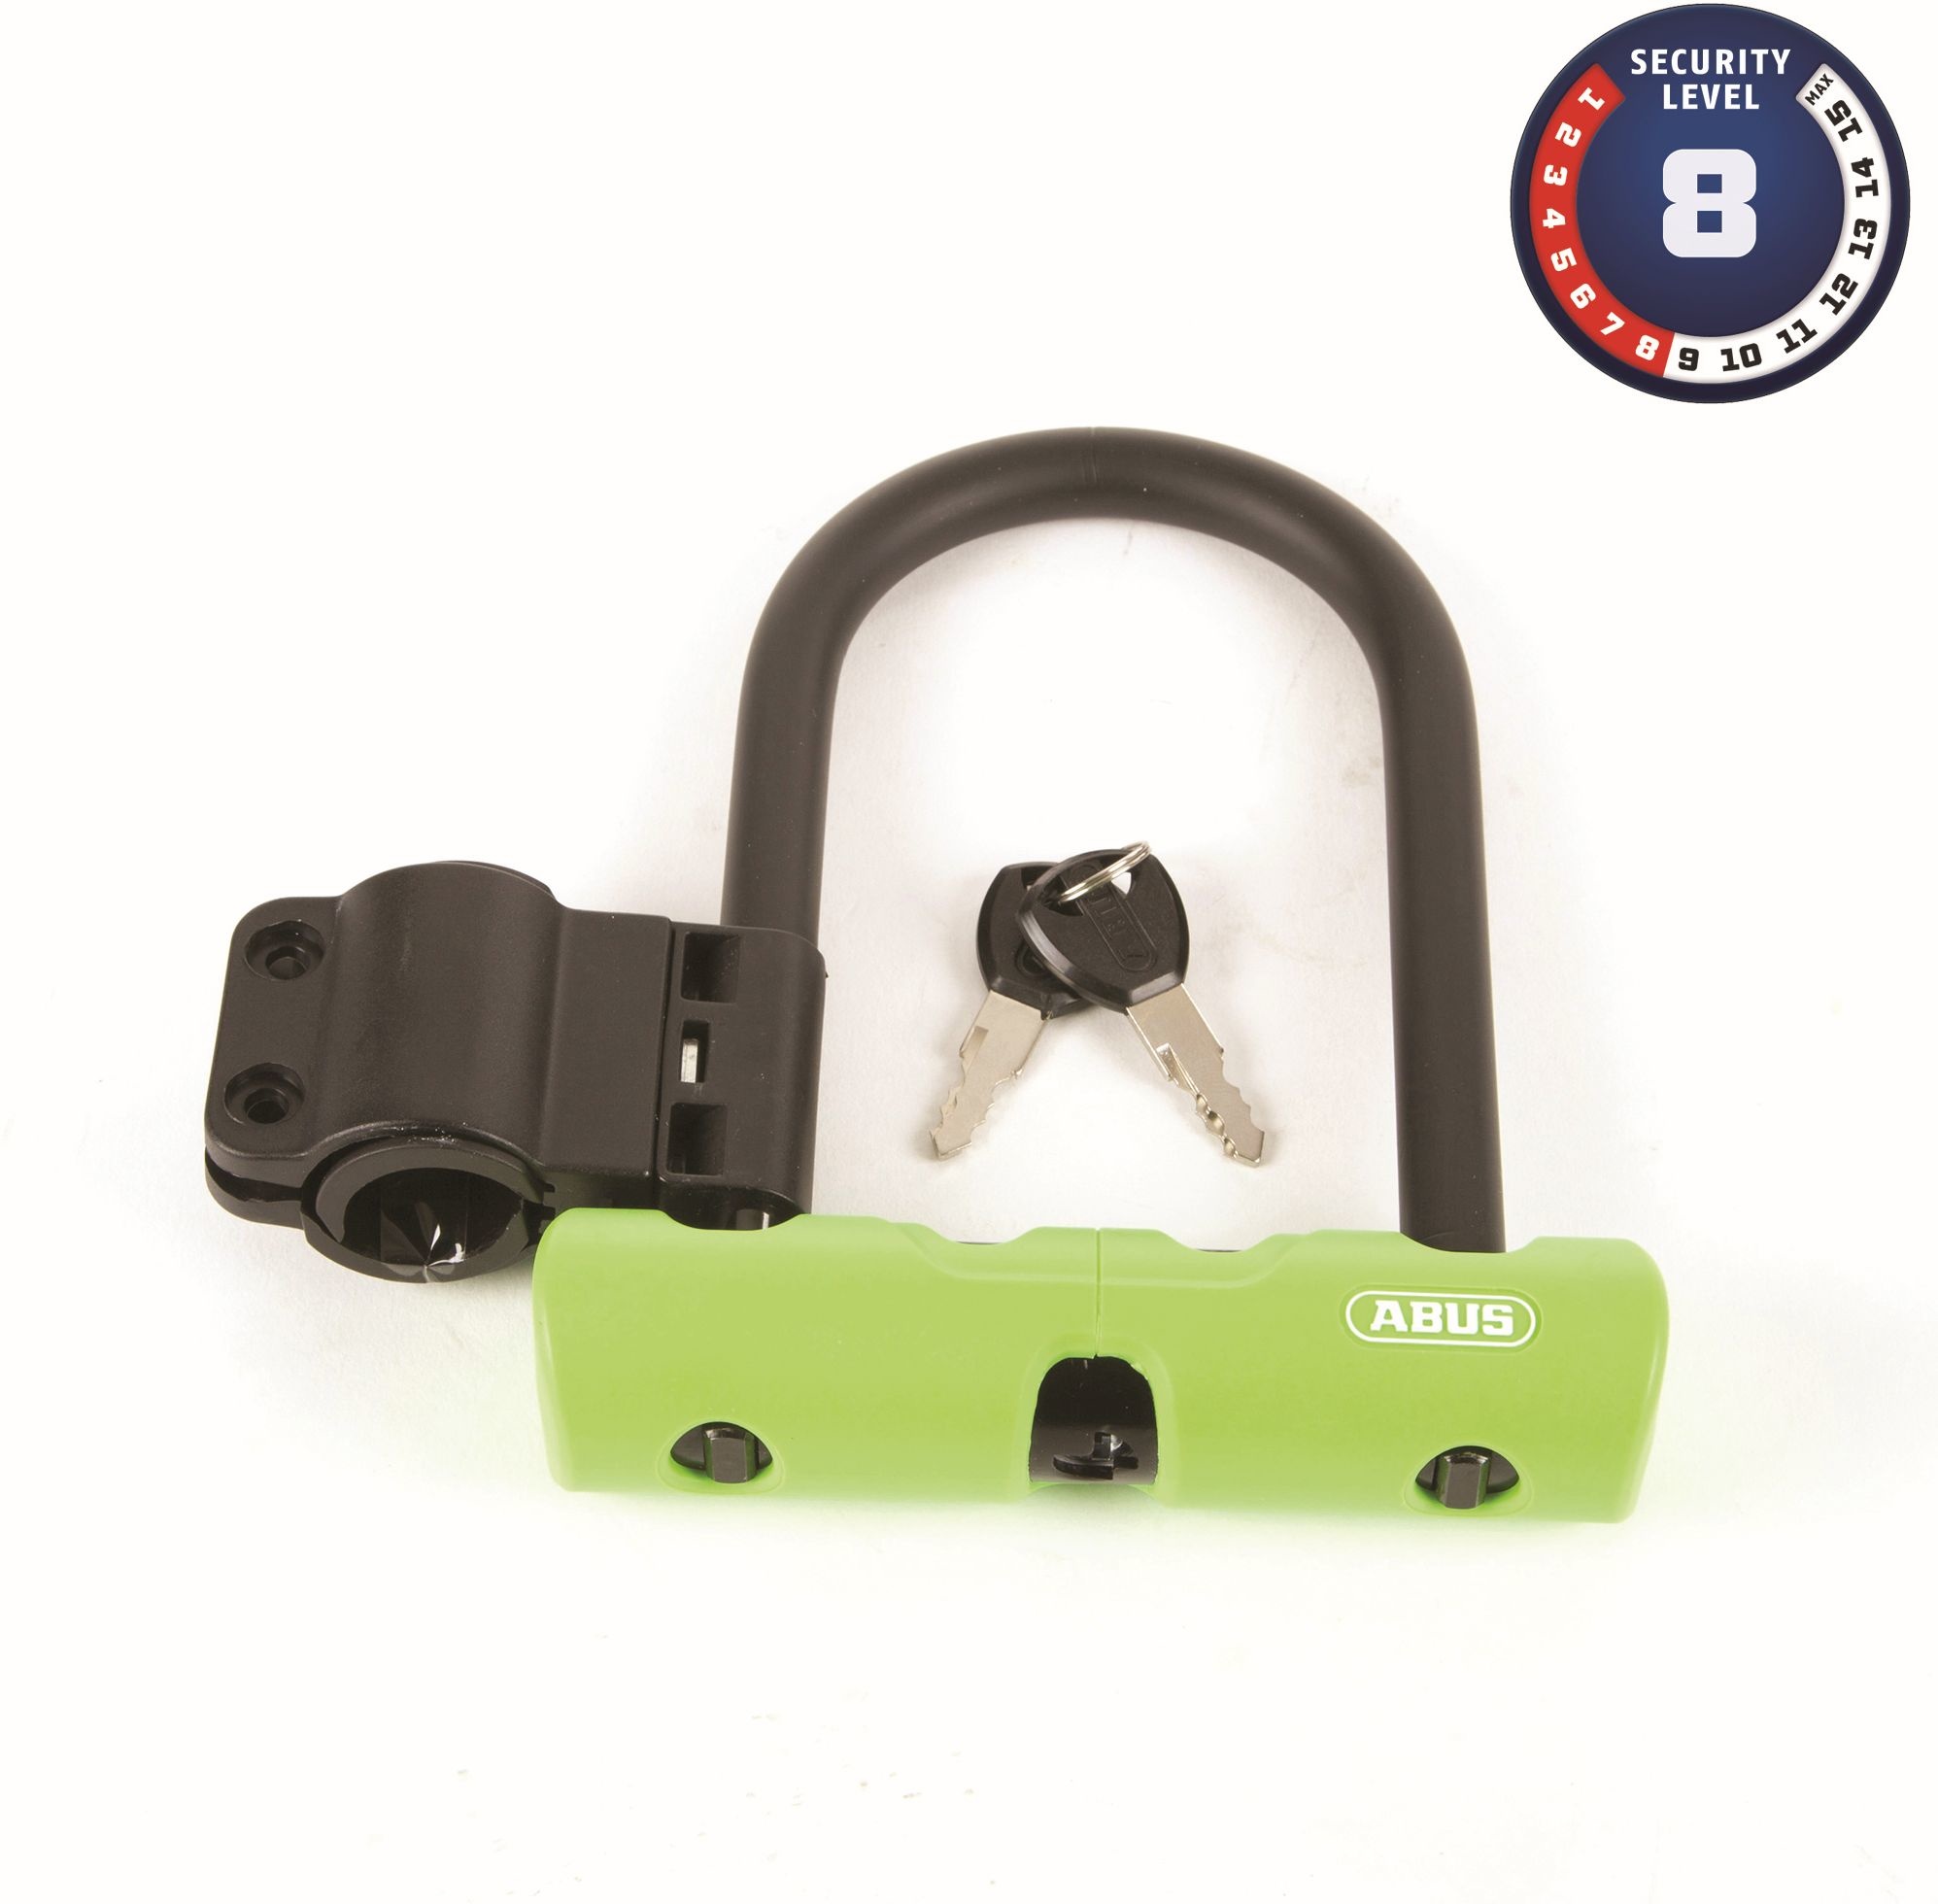 abus 410 review